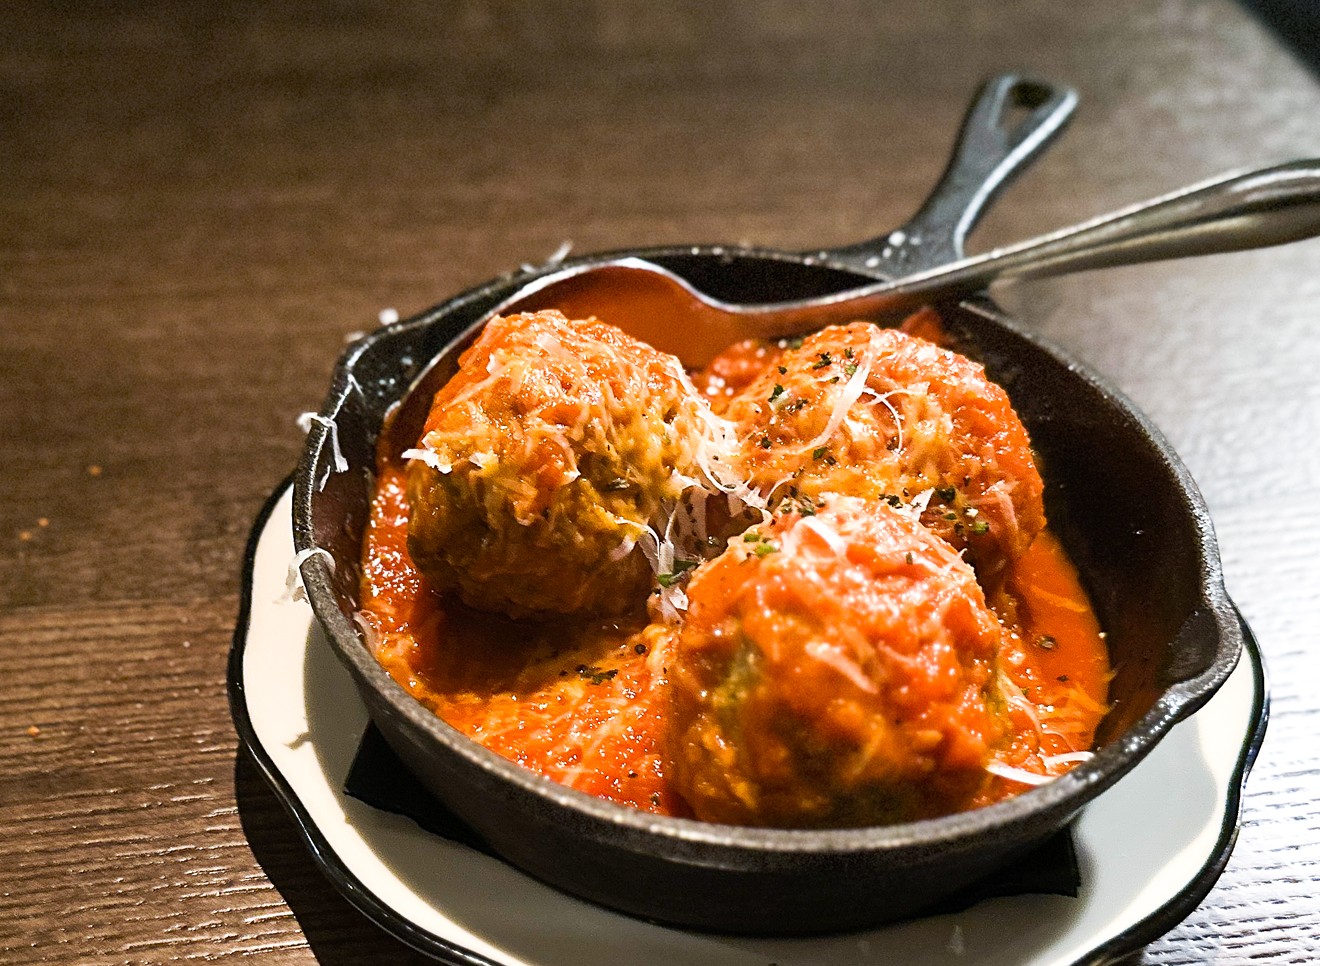 Almost Nonna-worthy beef and pork meatballs from Dea.